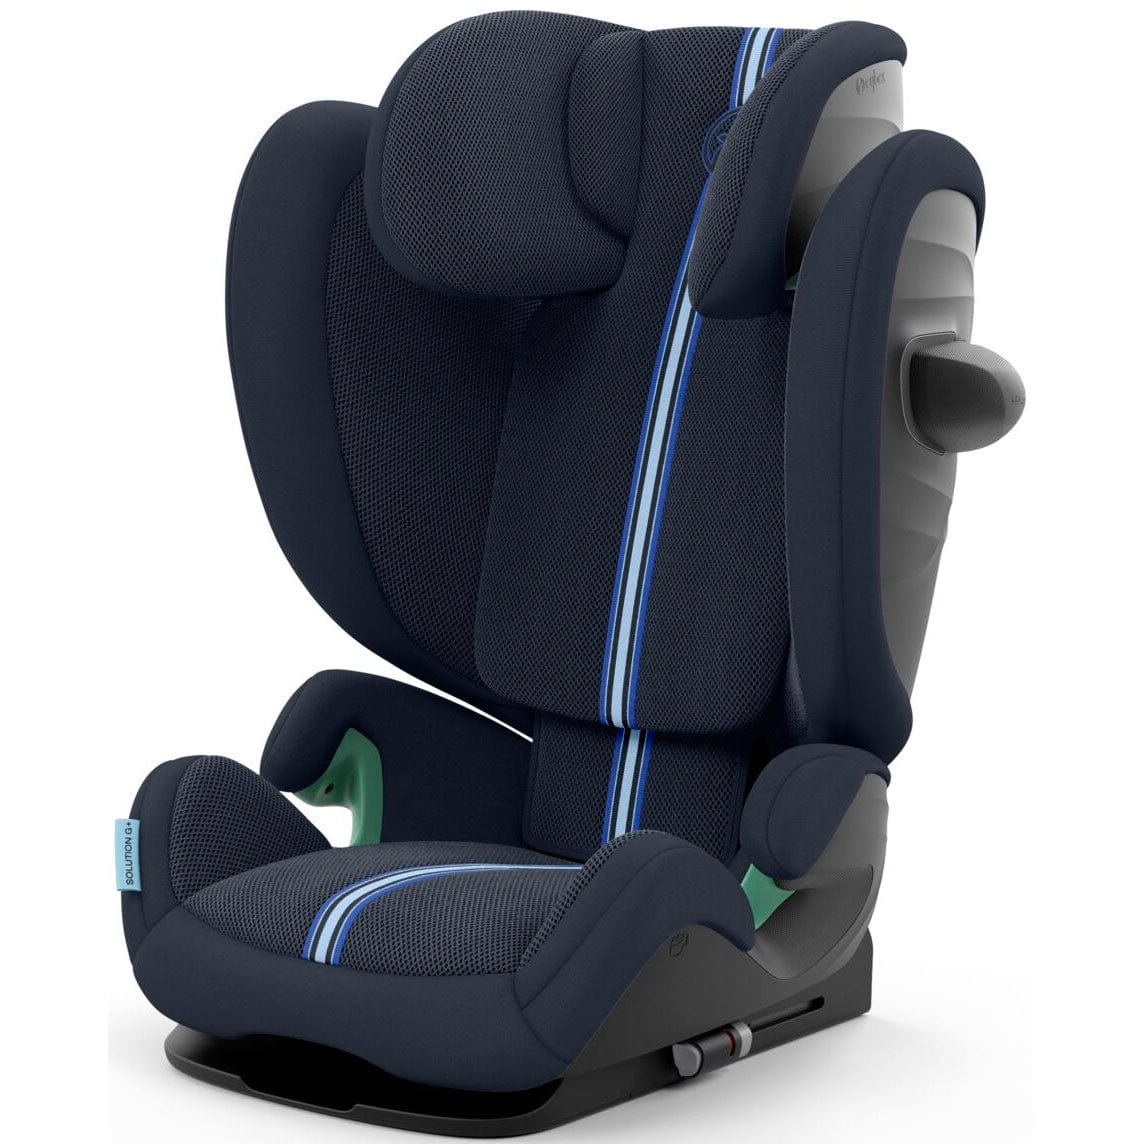 Cybex highback booster seats Cybex Solution G i-Fix Plus Highback Booster in Ocean Blue